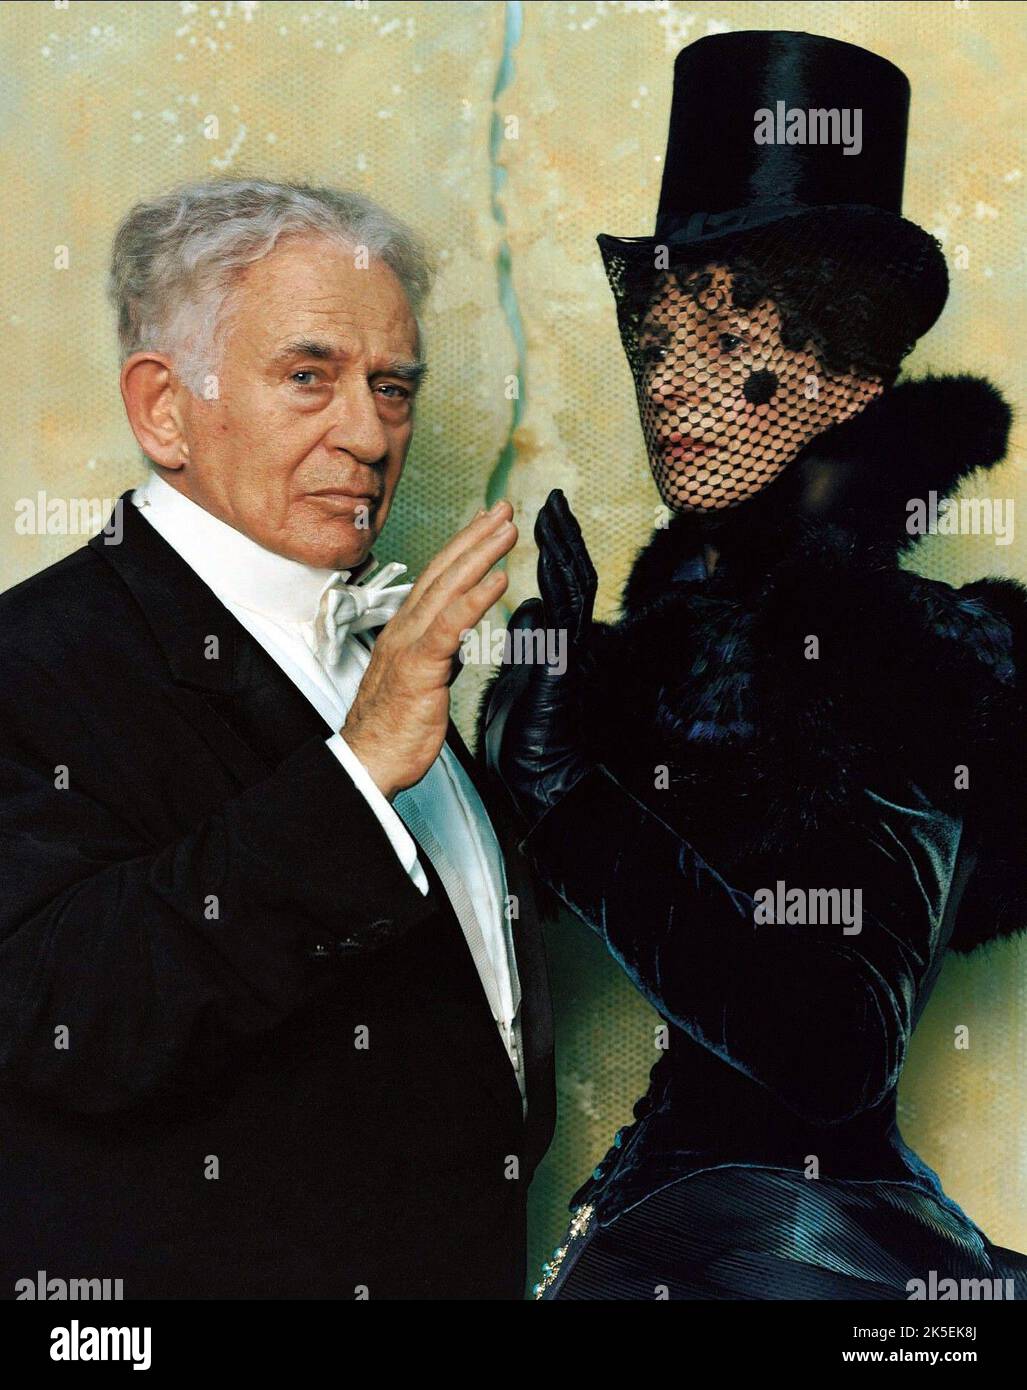 NORMAN MAILER IN CREMASTER 2, THE CREMASTER CYCLE: A CONVERSATION WITH MATTHEW BARNEY, 2004 Stock Photo